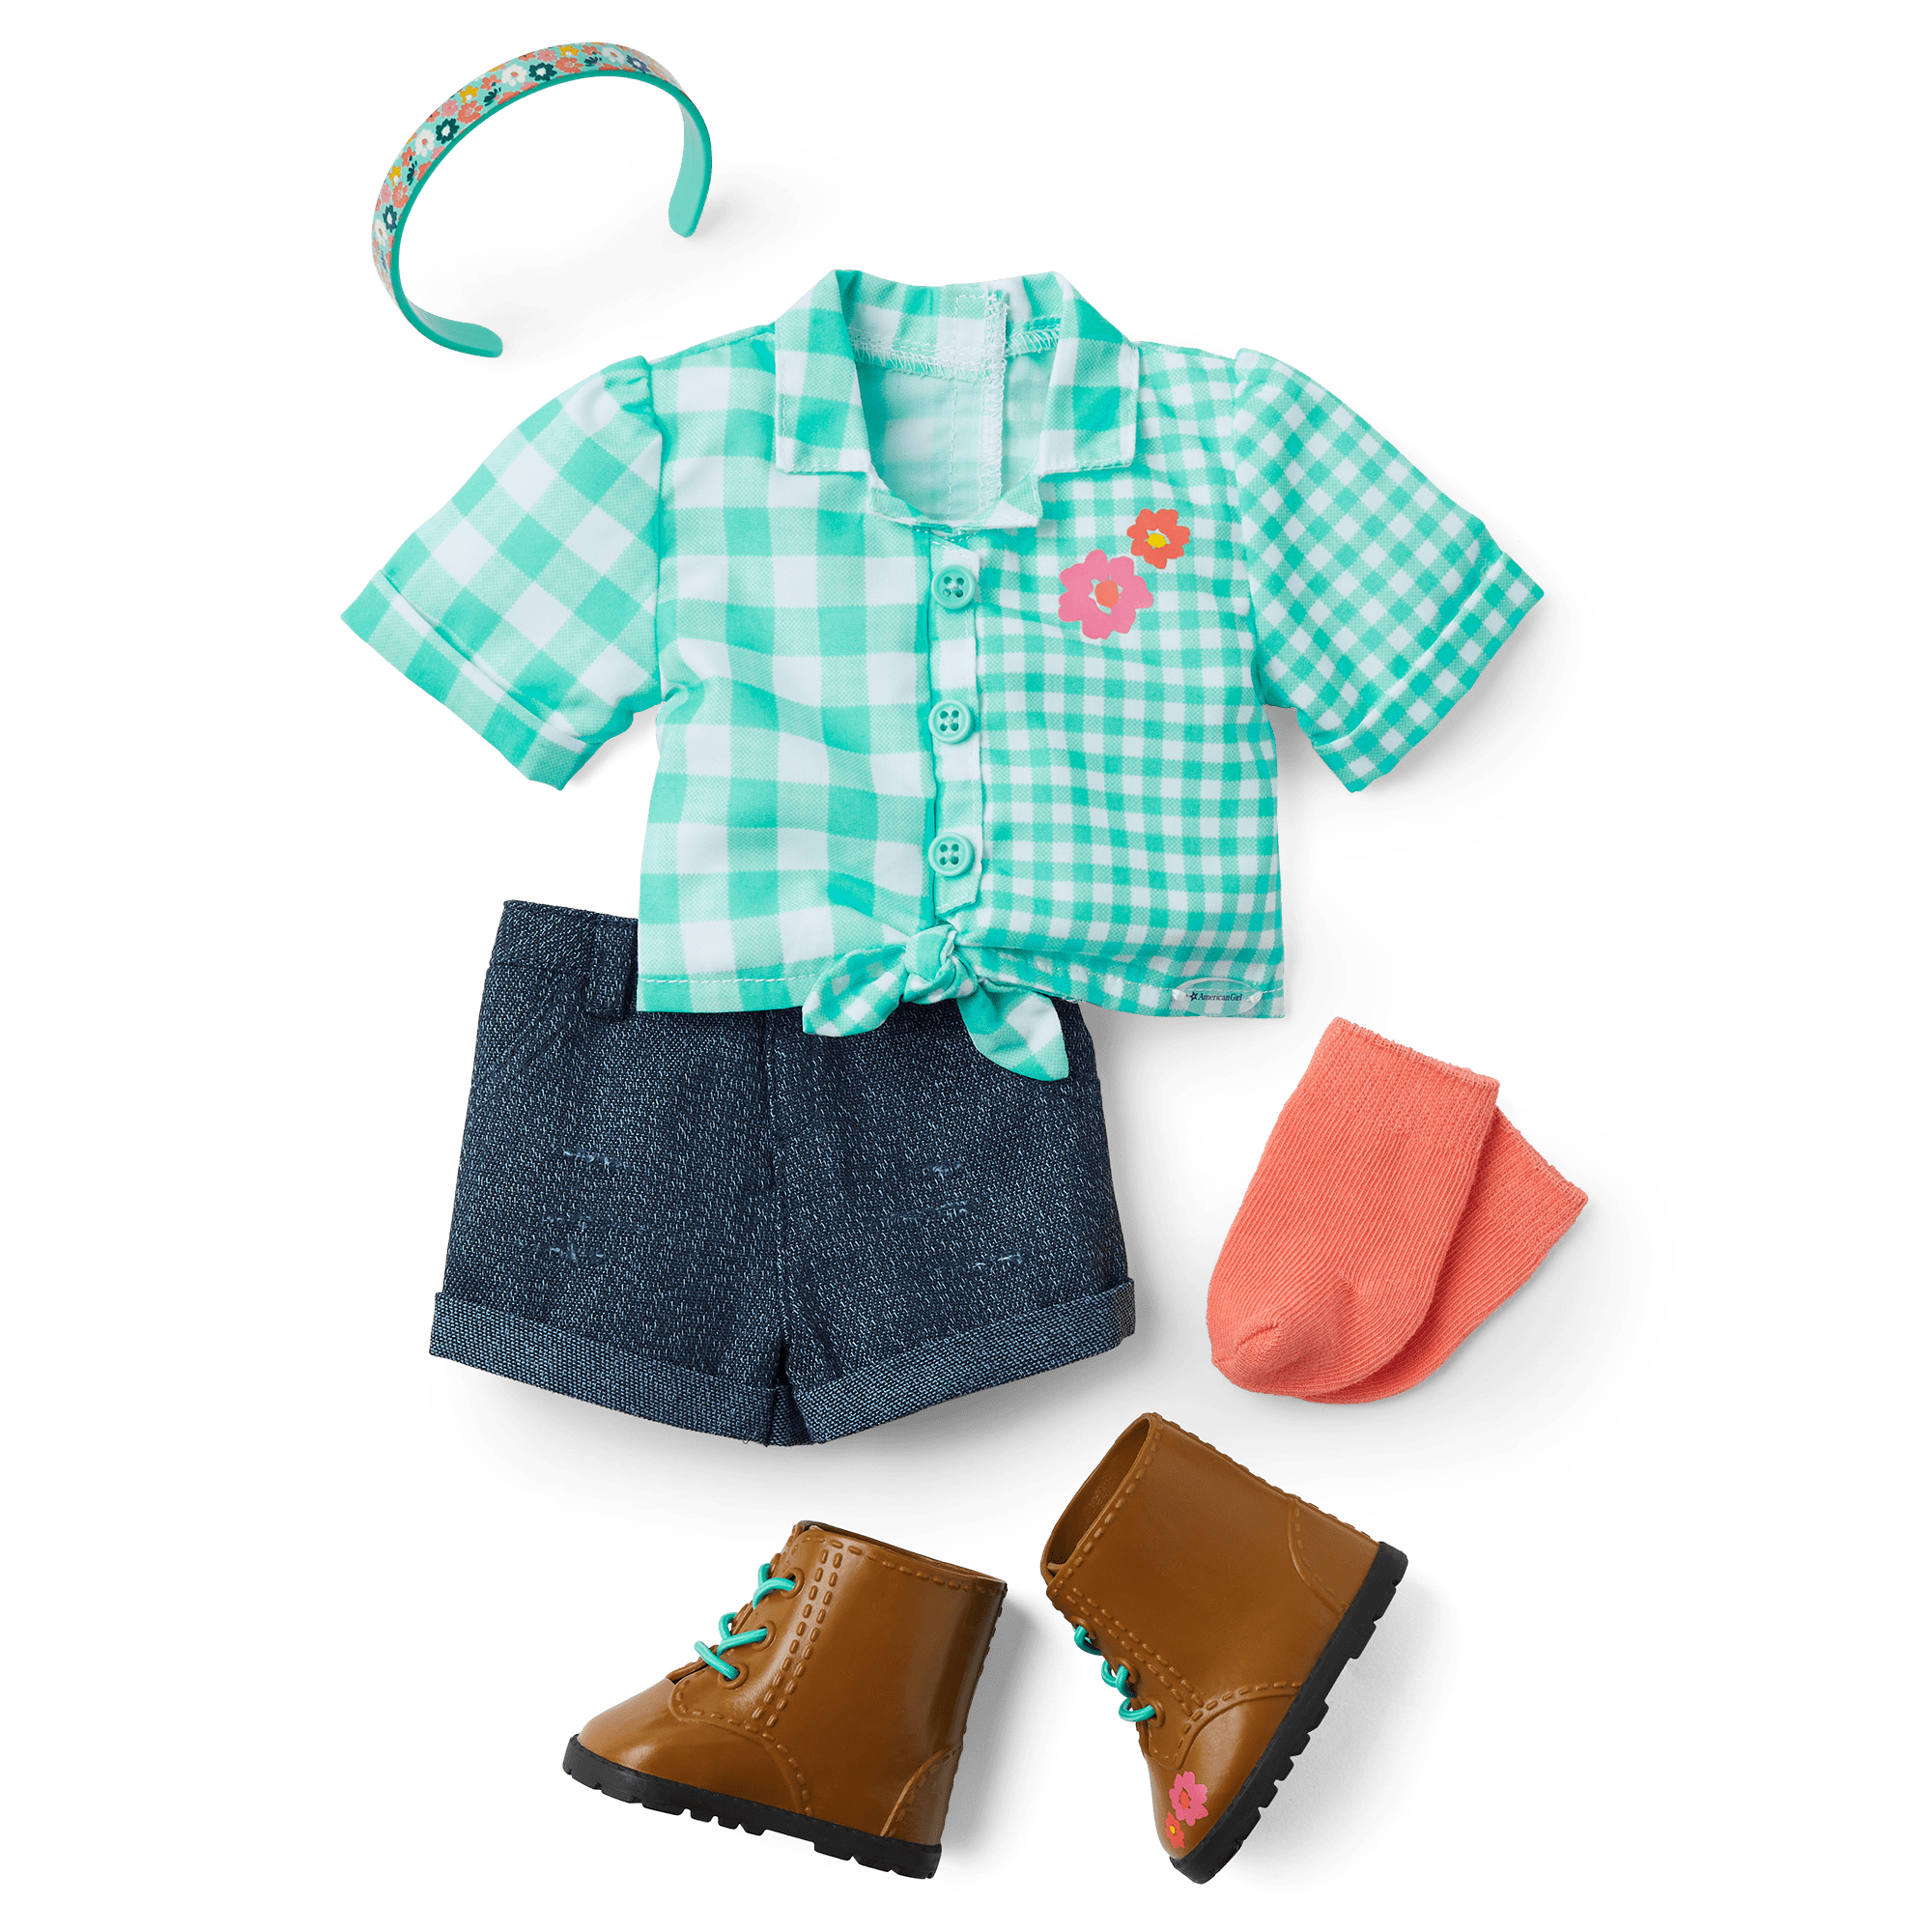 Yog-Ahh Outfit for 18-inch Dolls